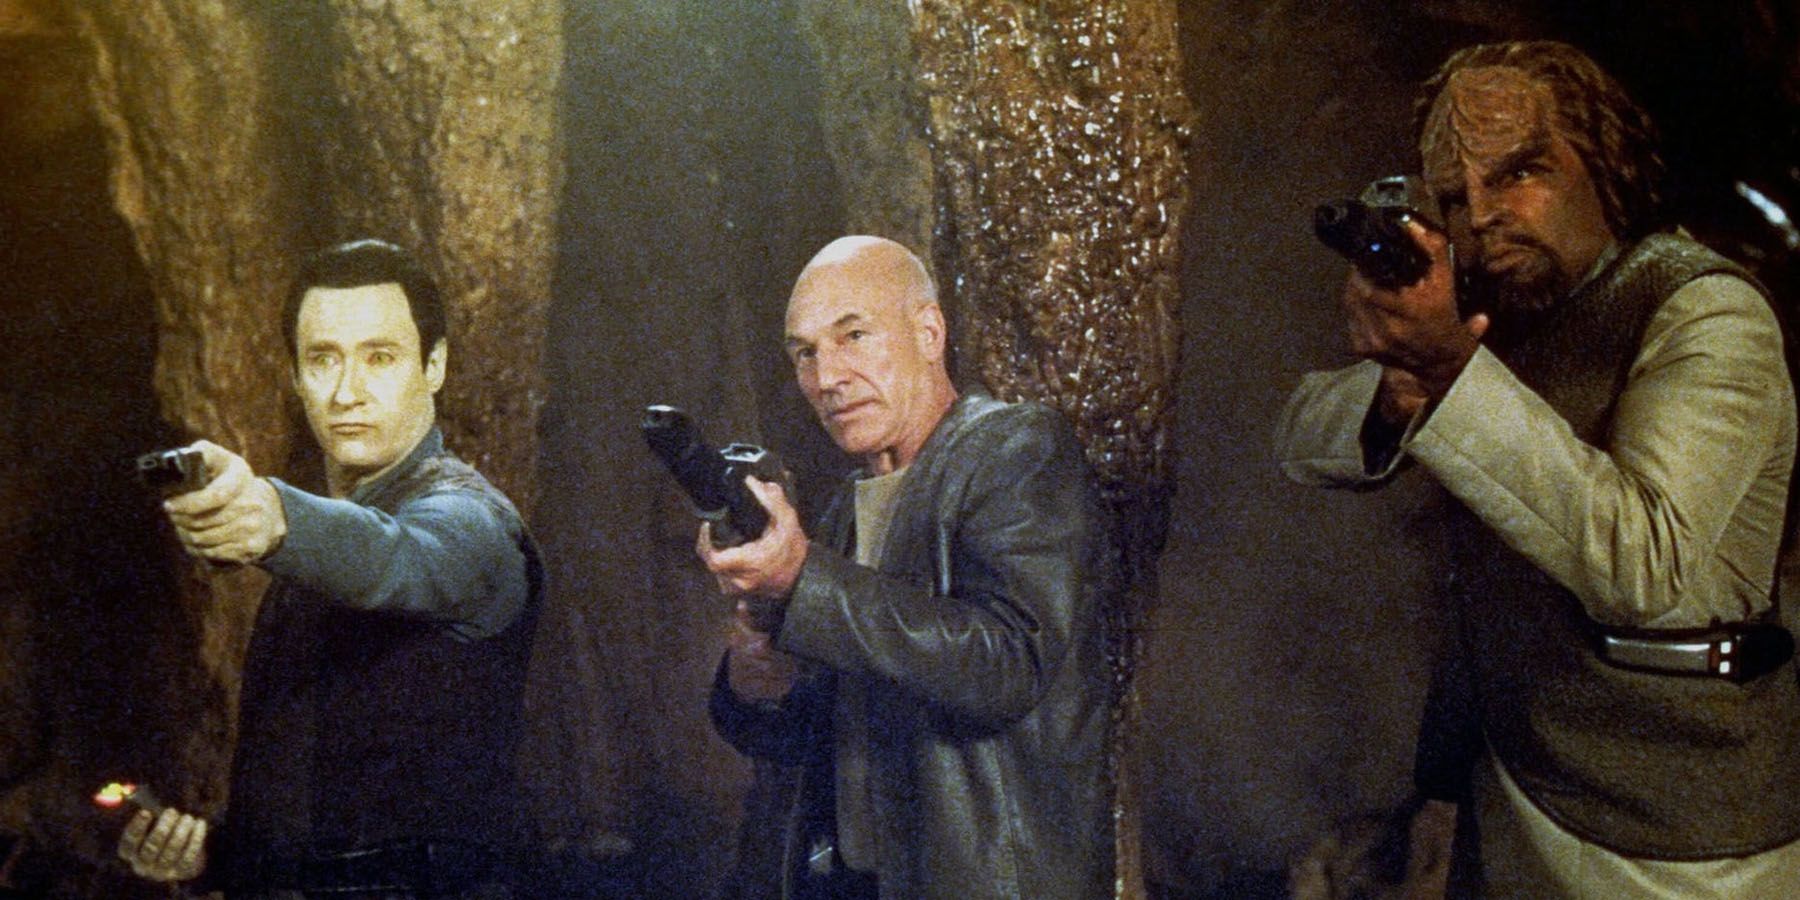 Picard in Insurrection